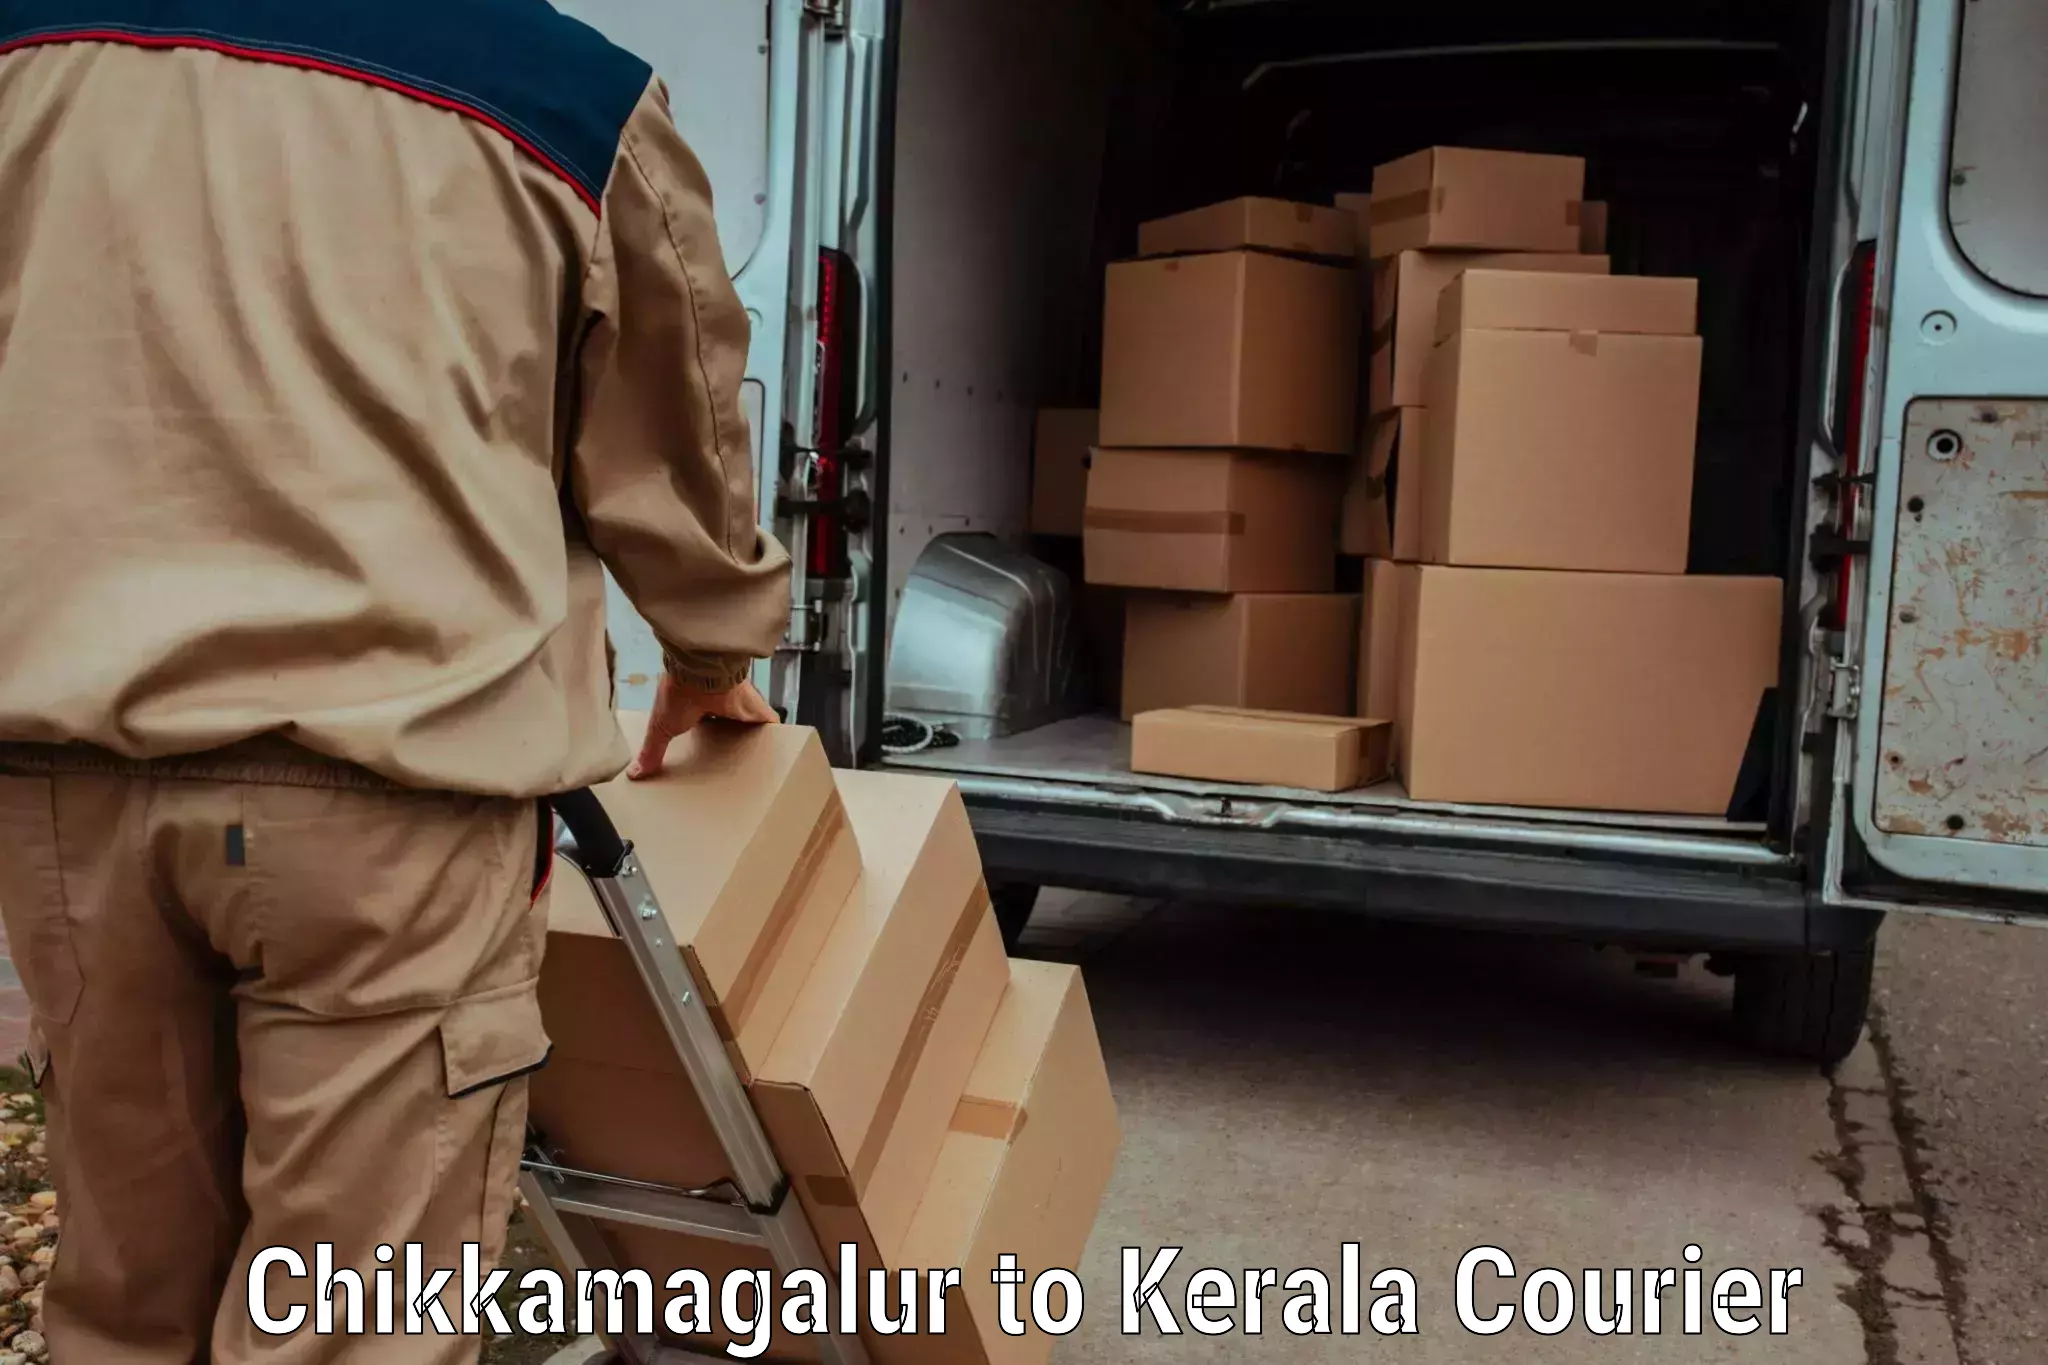 Next-day freight services Chikkamagalur to Perumbavoor